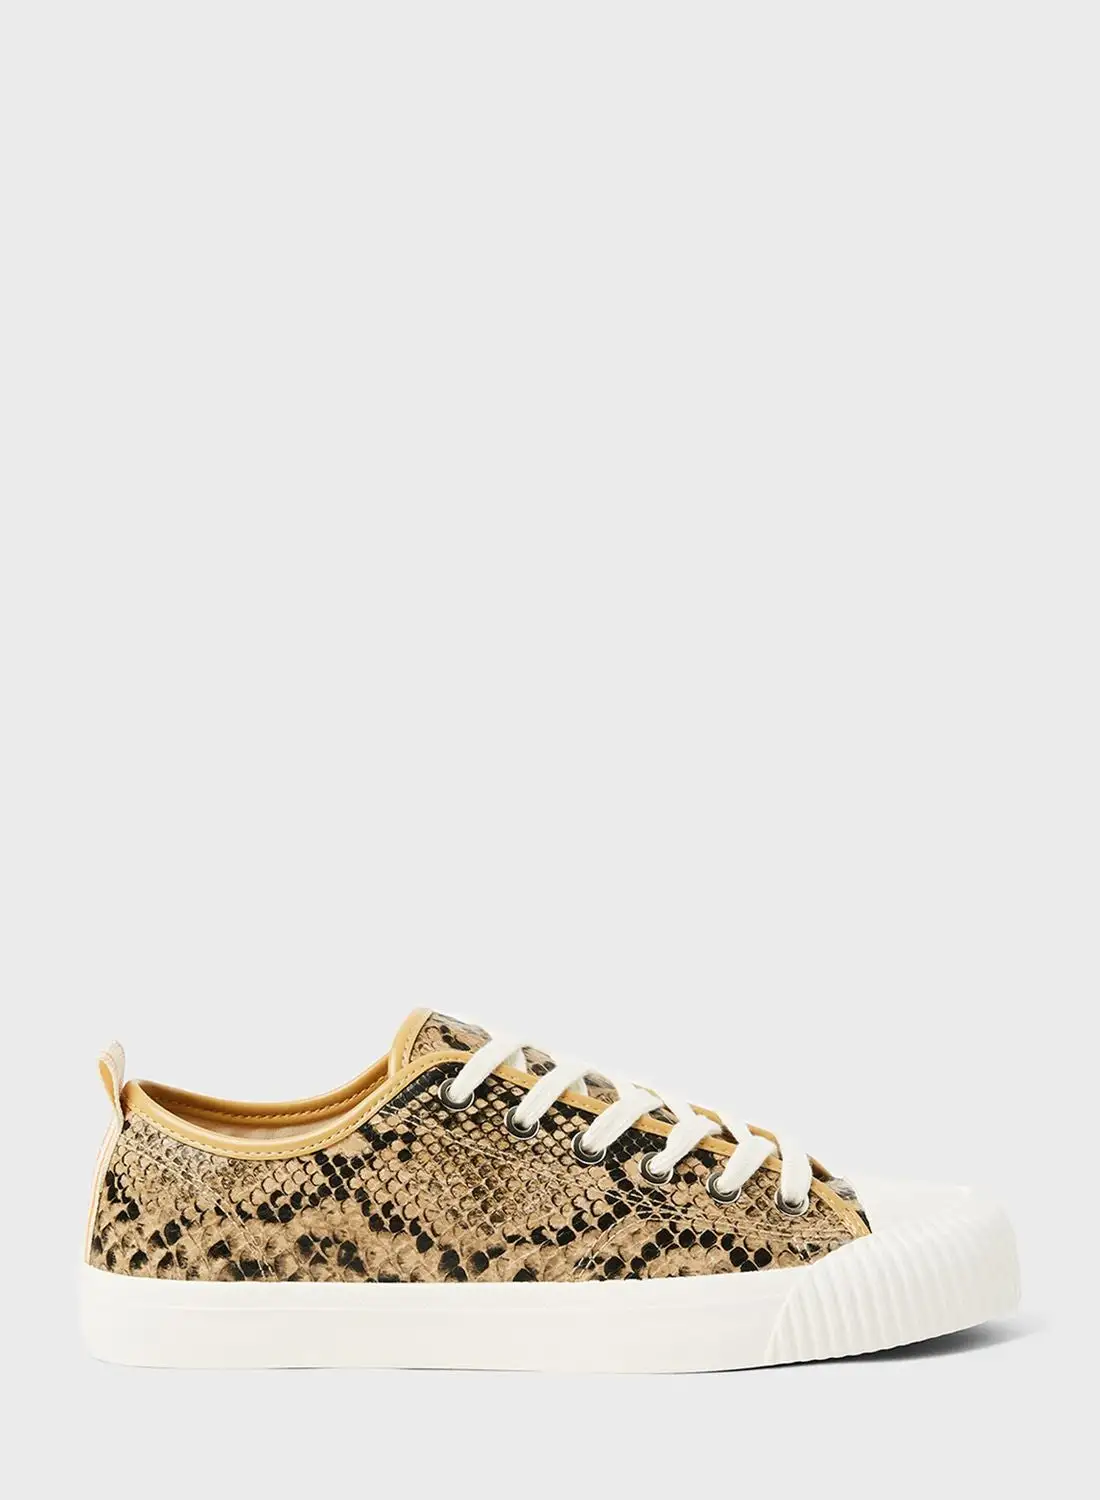 ONLY Sunny Snakeskin Print Sneakers